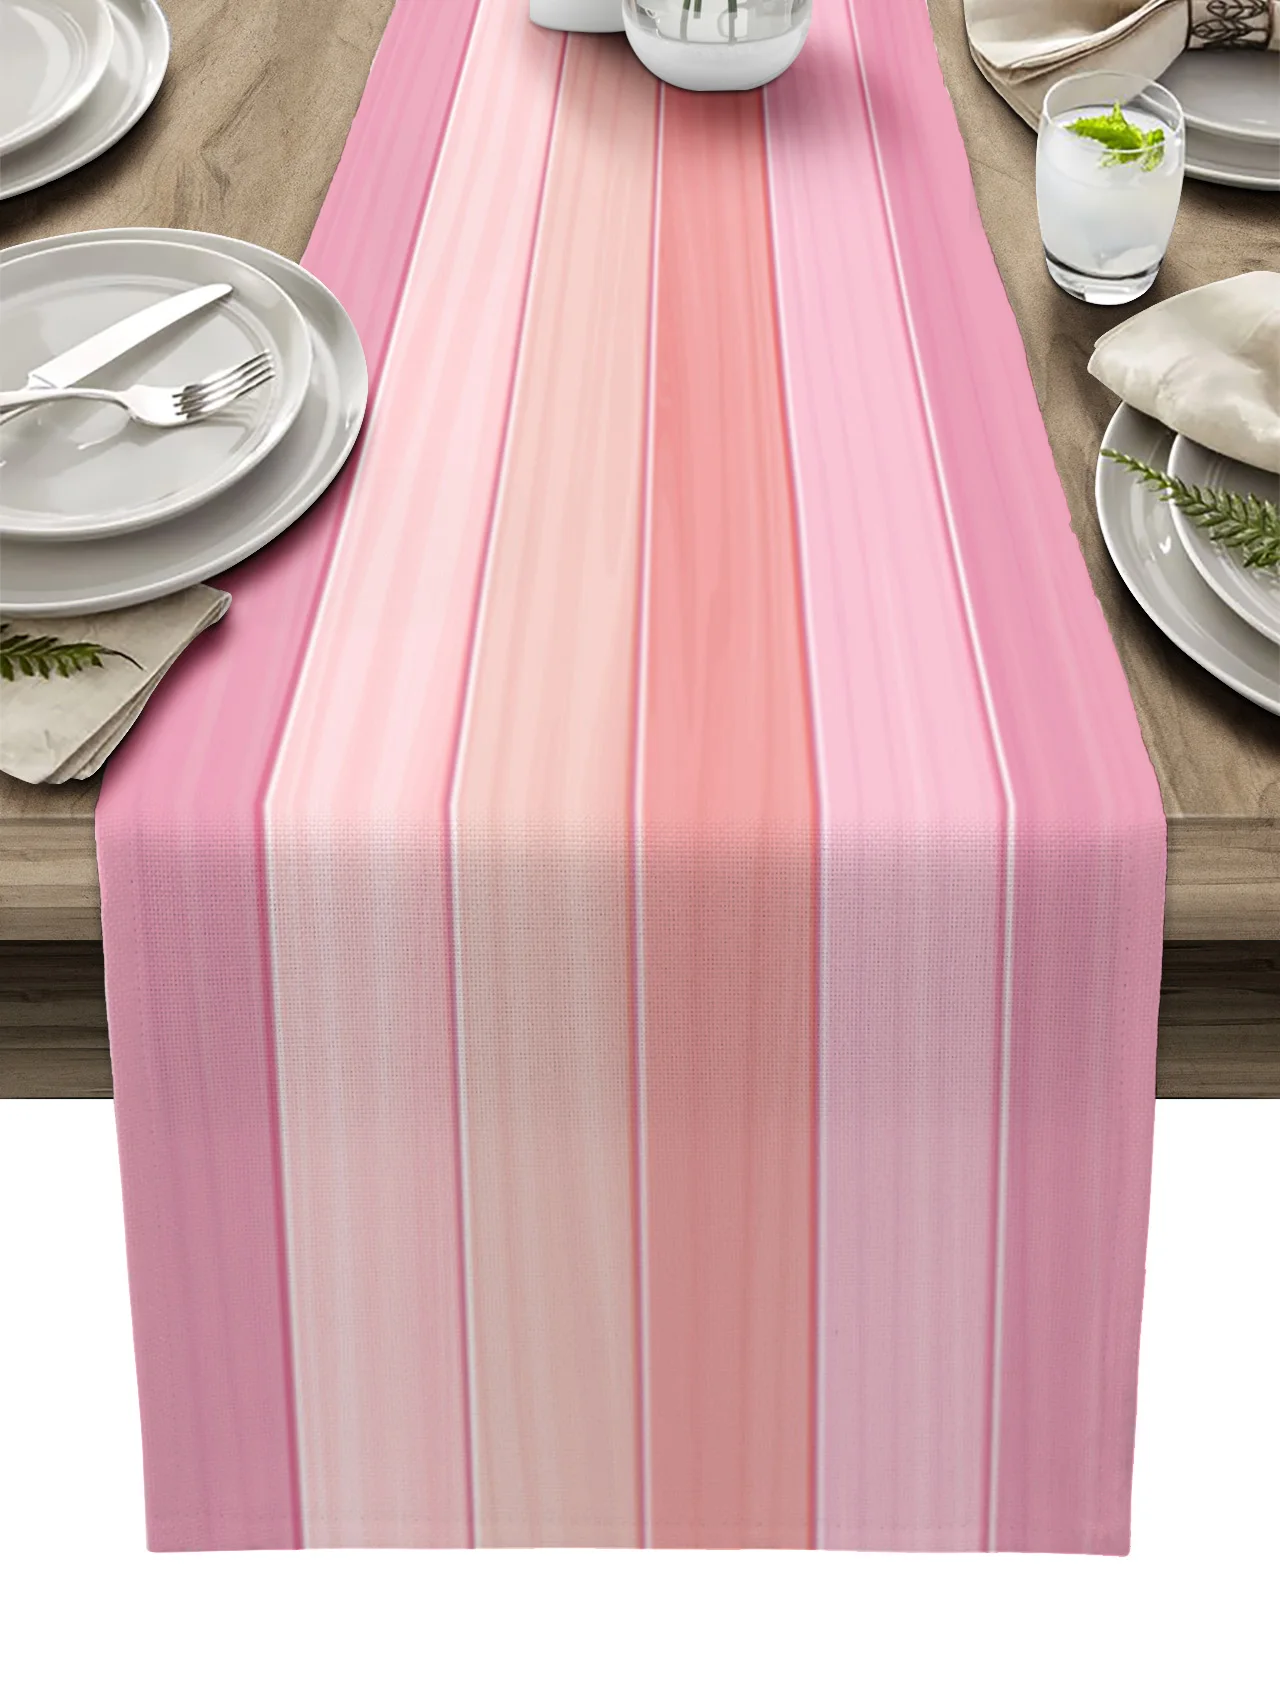 

Wood Grain Candy Pink Linen Table Runners Kitchen Table Decoration Accessories Dining Table Runner Wedding Party Supplies